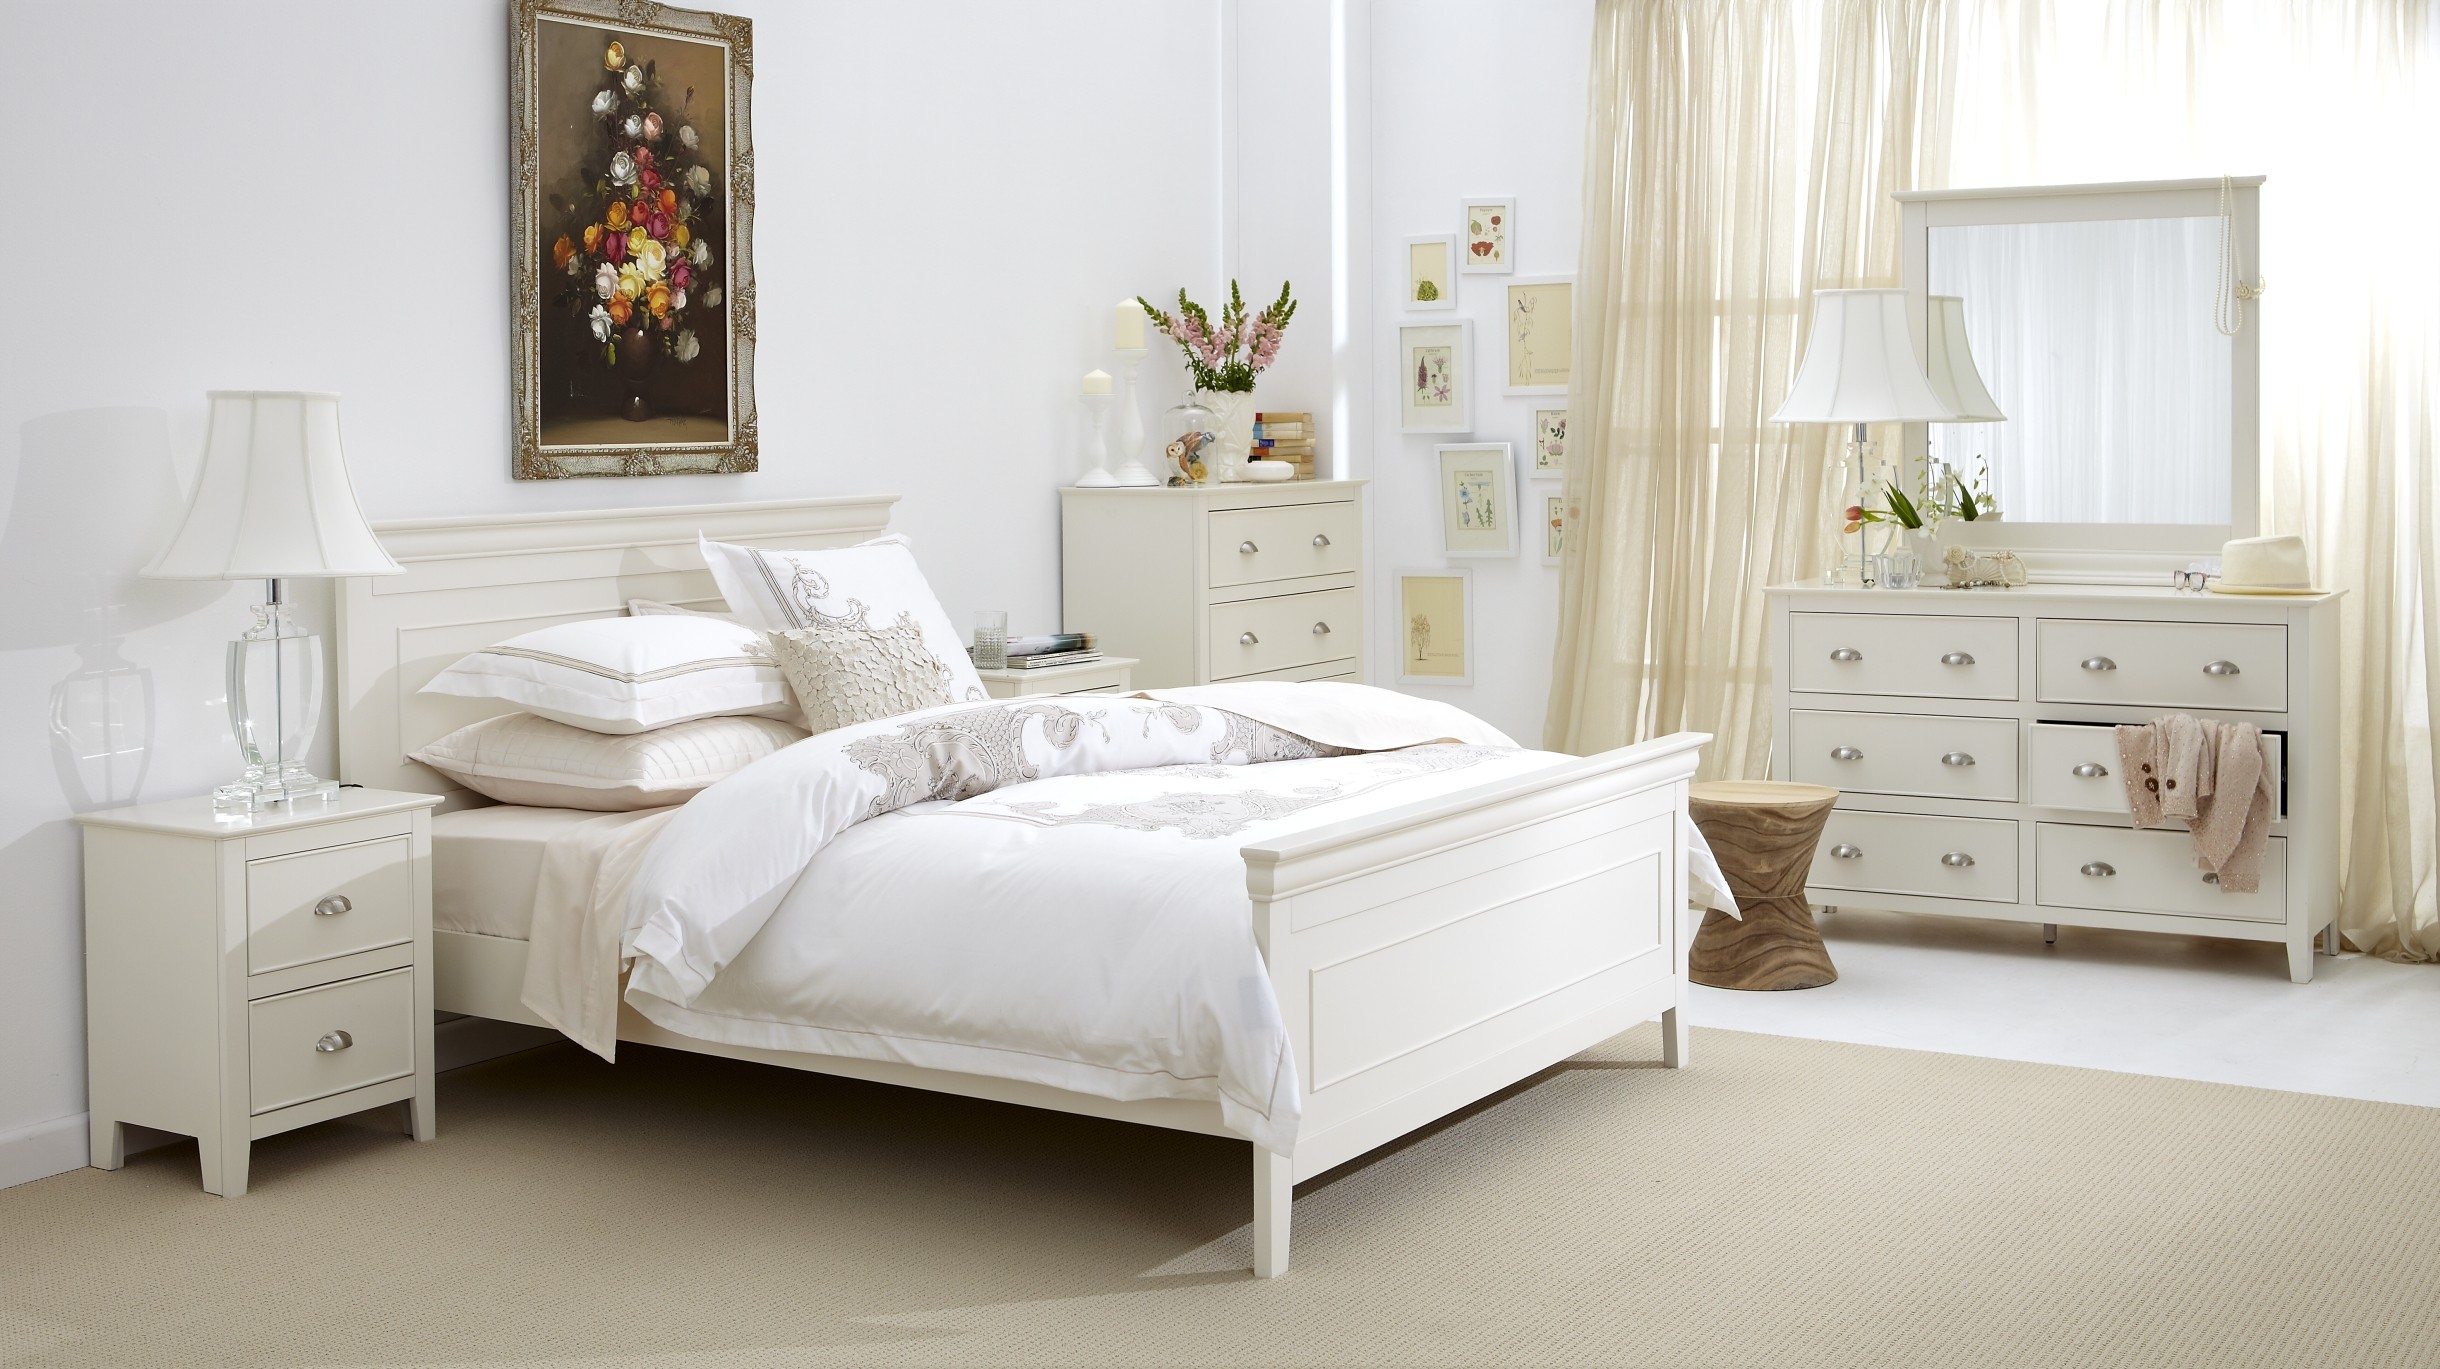 room ideas with white furniture photo - 3